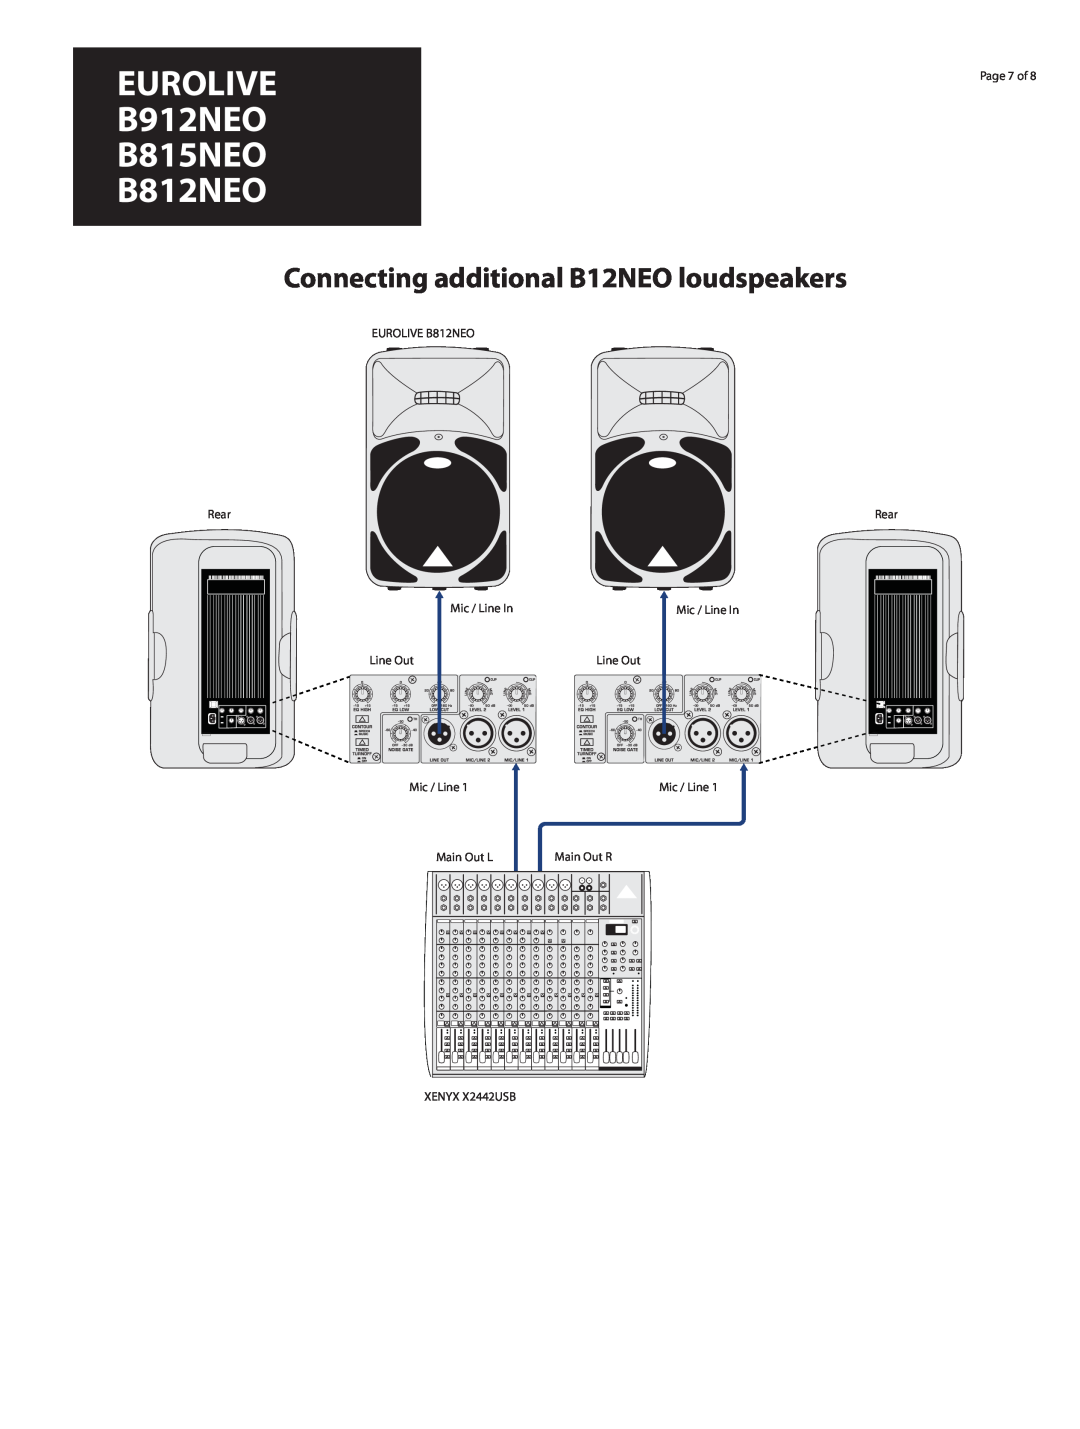 Behringer manual Connecting additional B12NEO loudspeakers, EUROLIVE B912NEO B815NEO B812NEO 